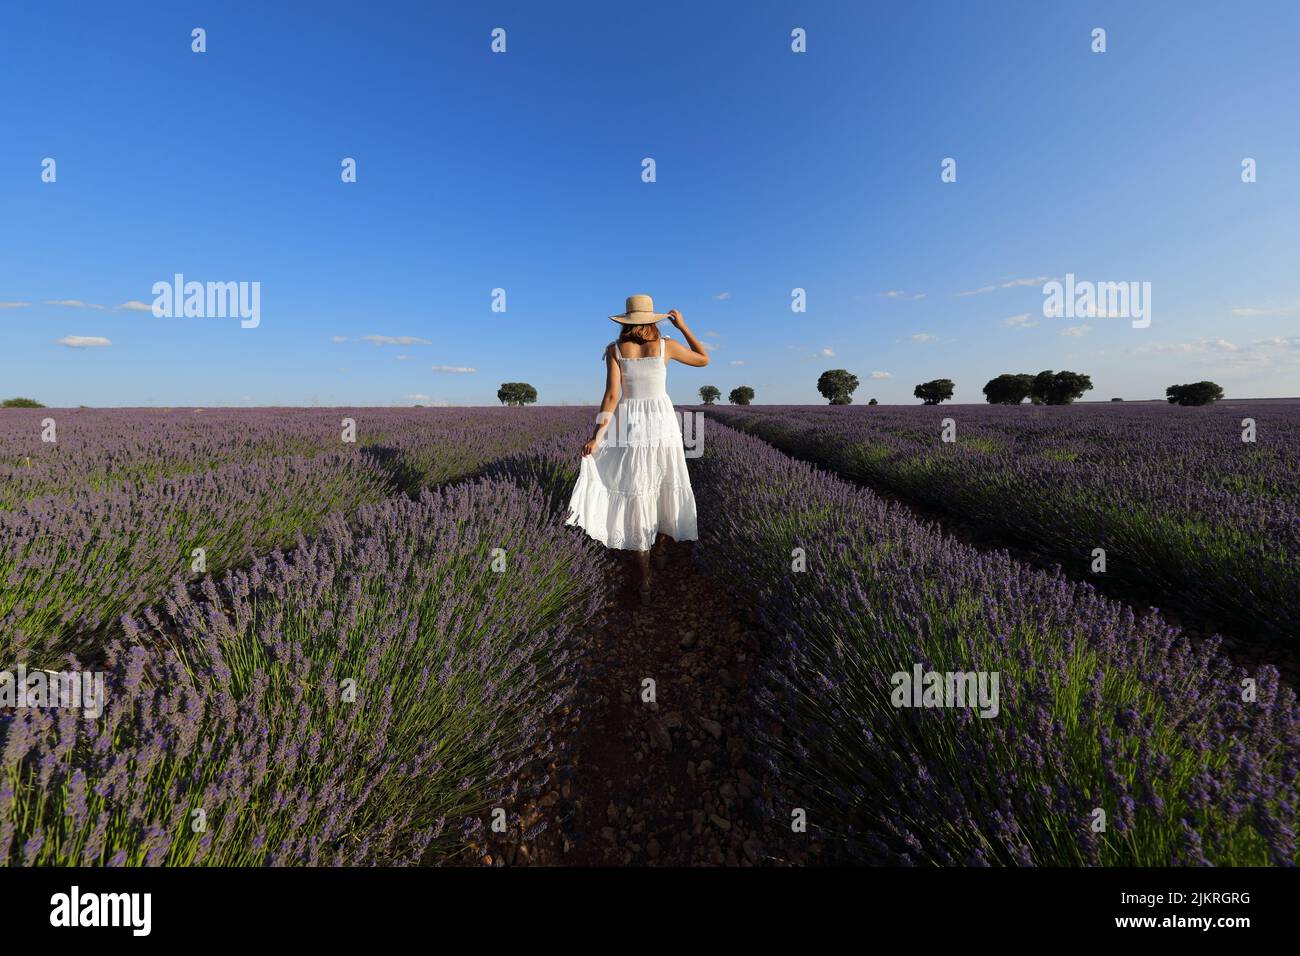 Back view of a woman wearing white dress and pamela hat walking across a lavender field Stock Photo